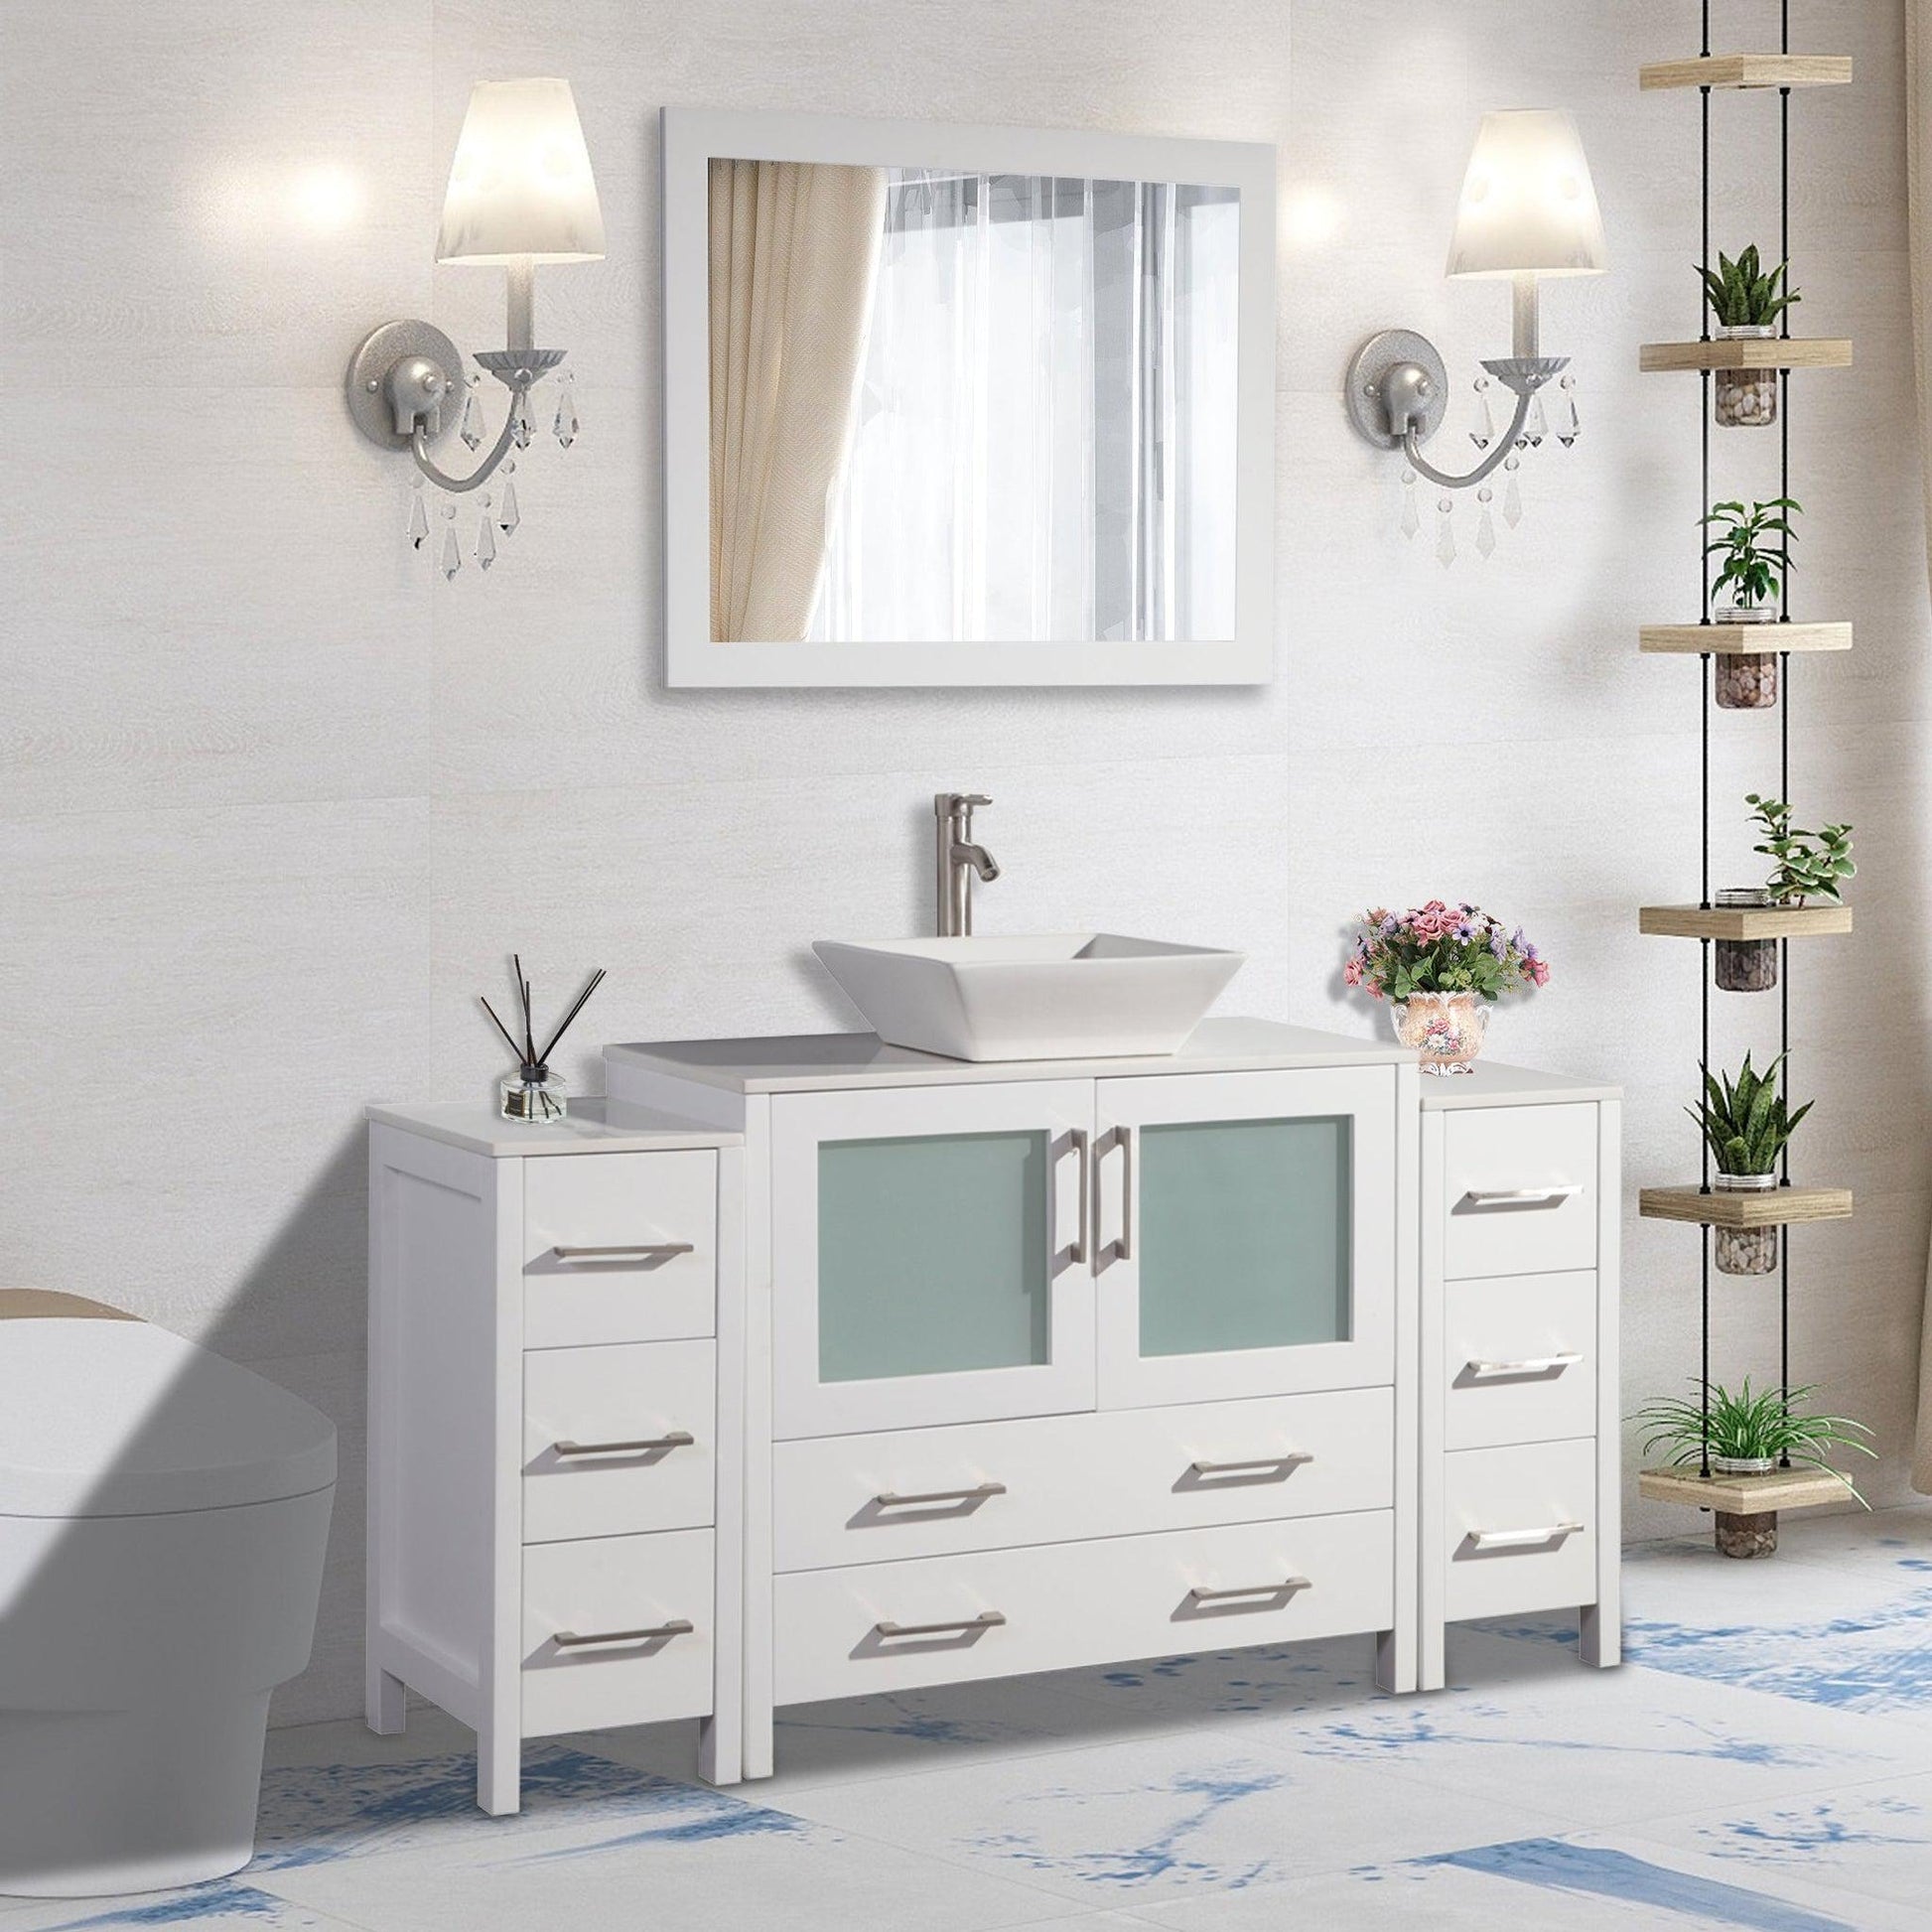 Vanity Art Ravenna 60" Single White Freestanding Vanity Set With White Engineered Marble Top, Ceramic Vessel Sink, 2 Side Cabinets and Mirror